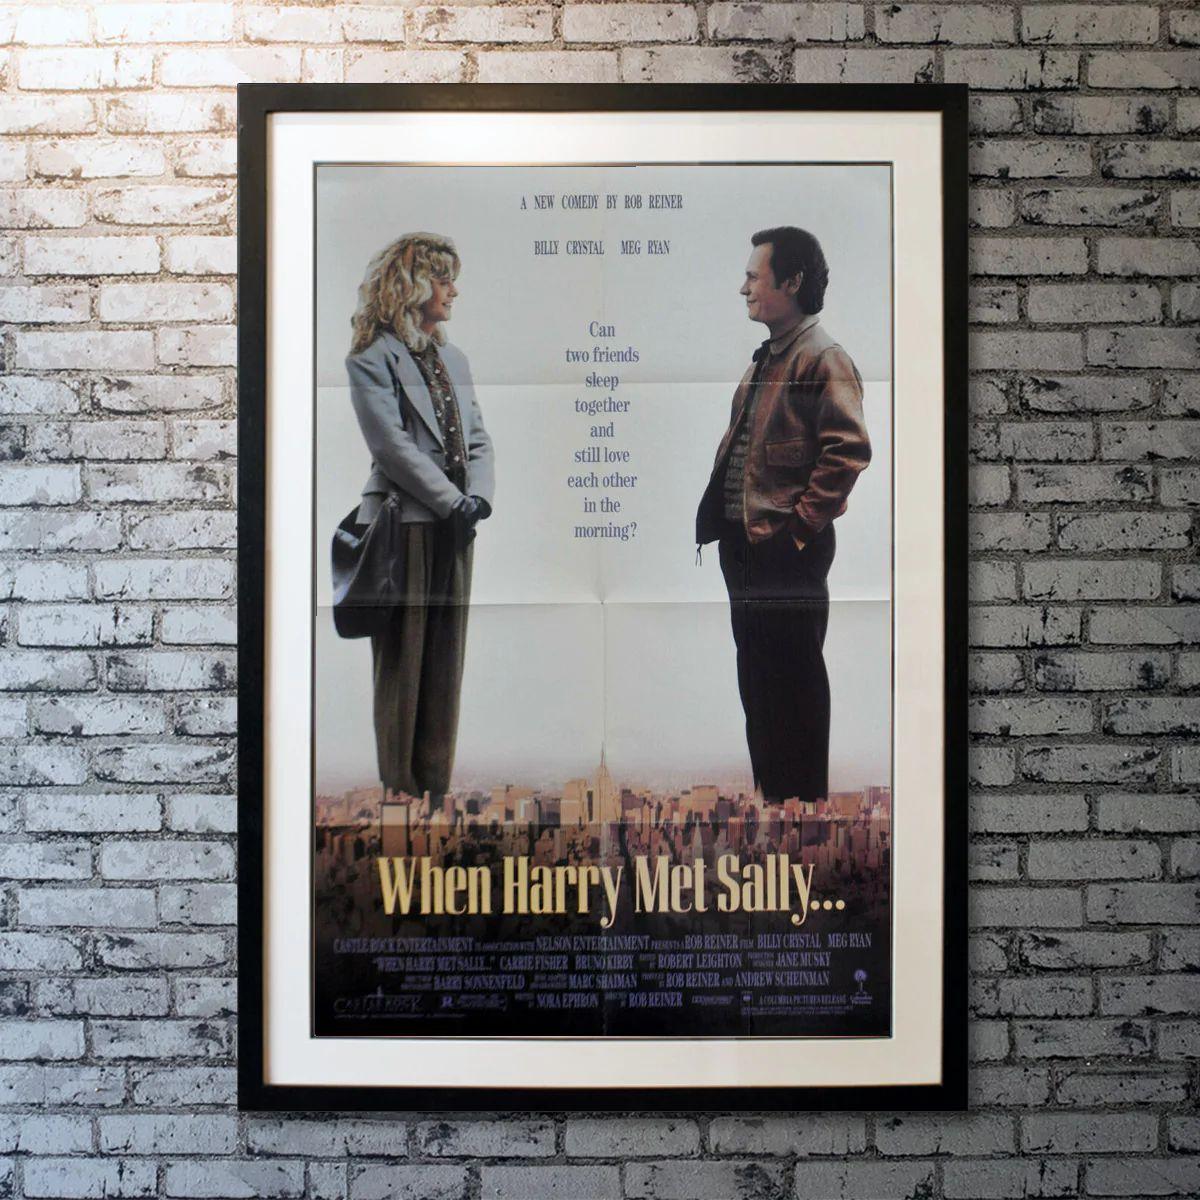 When Harry Met Sally..., Unframed Poster, 1989

Original Quad (30 x 40 inches). In 1977, college graduates Harry Burns (Billy Crystal) and Sally Albright (Meg Ryan) share a contentious car ride from Chicago to New York, during which they argue